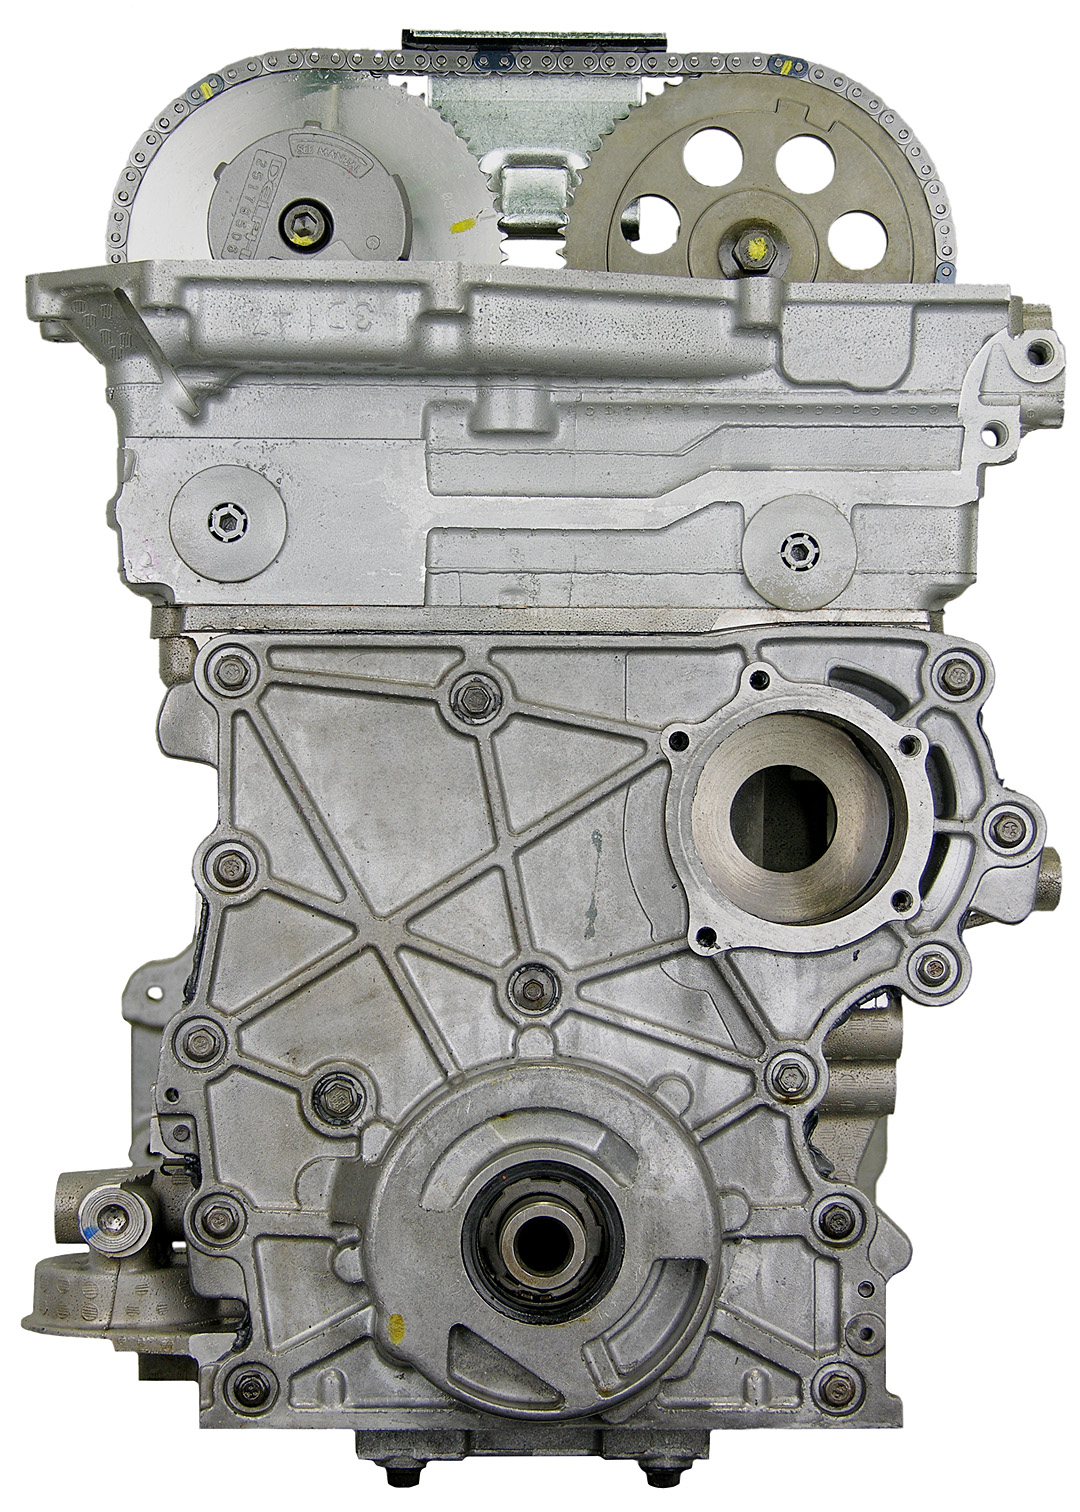 Chevy 4.2L LL8 L6 Remanufactured Engine - 2002-2004